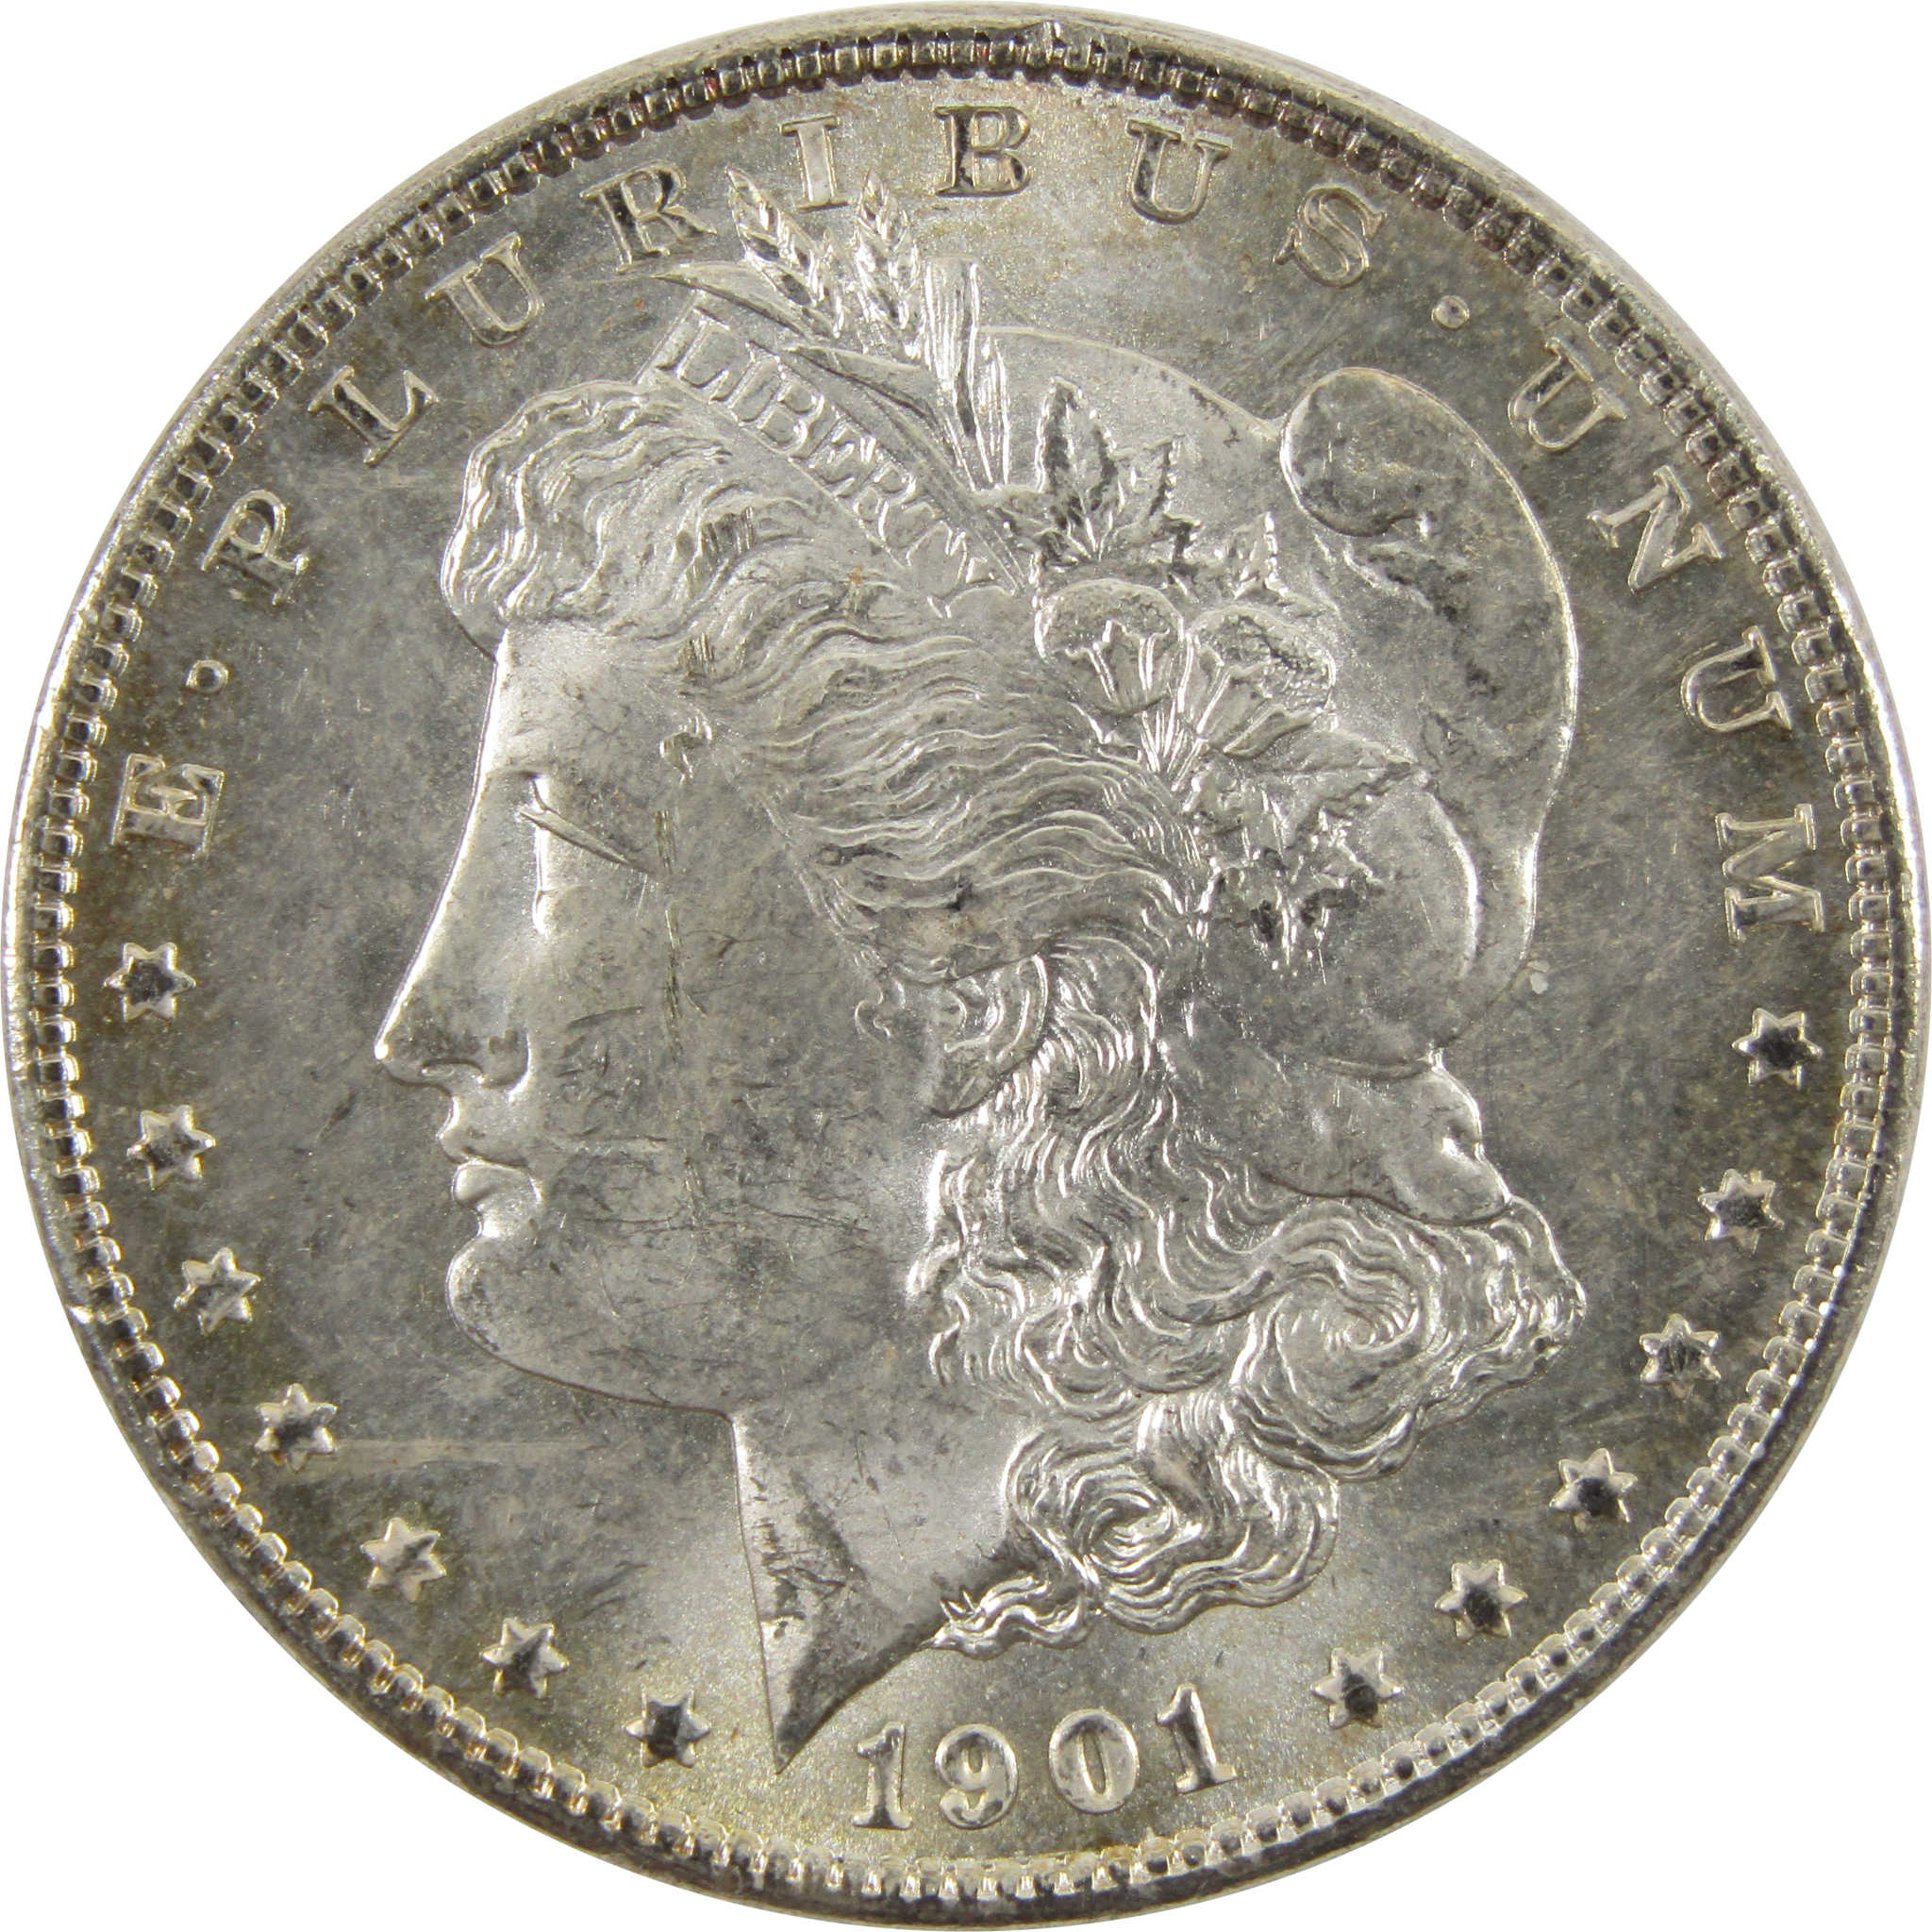 1901 O Morgan Dollar Uncirculated Details 90% Silver $1 SKU:I10466 - Morgan coin - Morgan silver dollar - Morgan silver dollar for sale - Profile Coins &amp; Collectibles